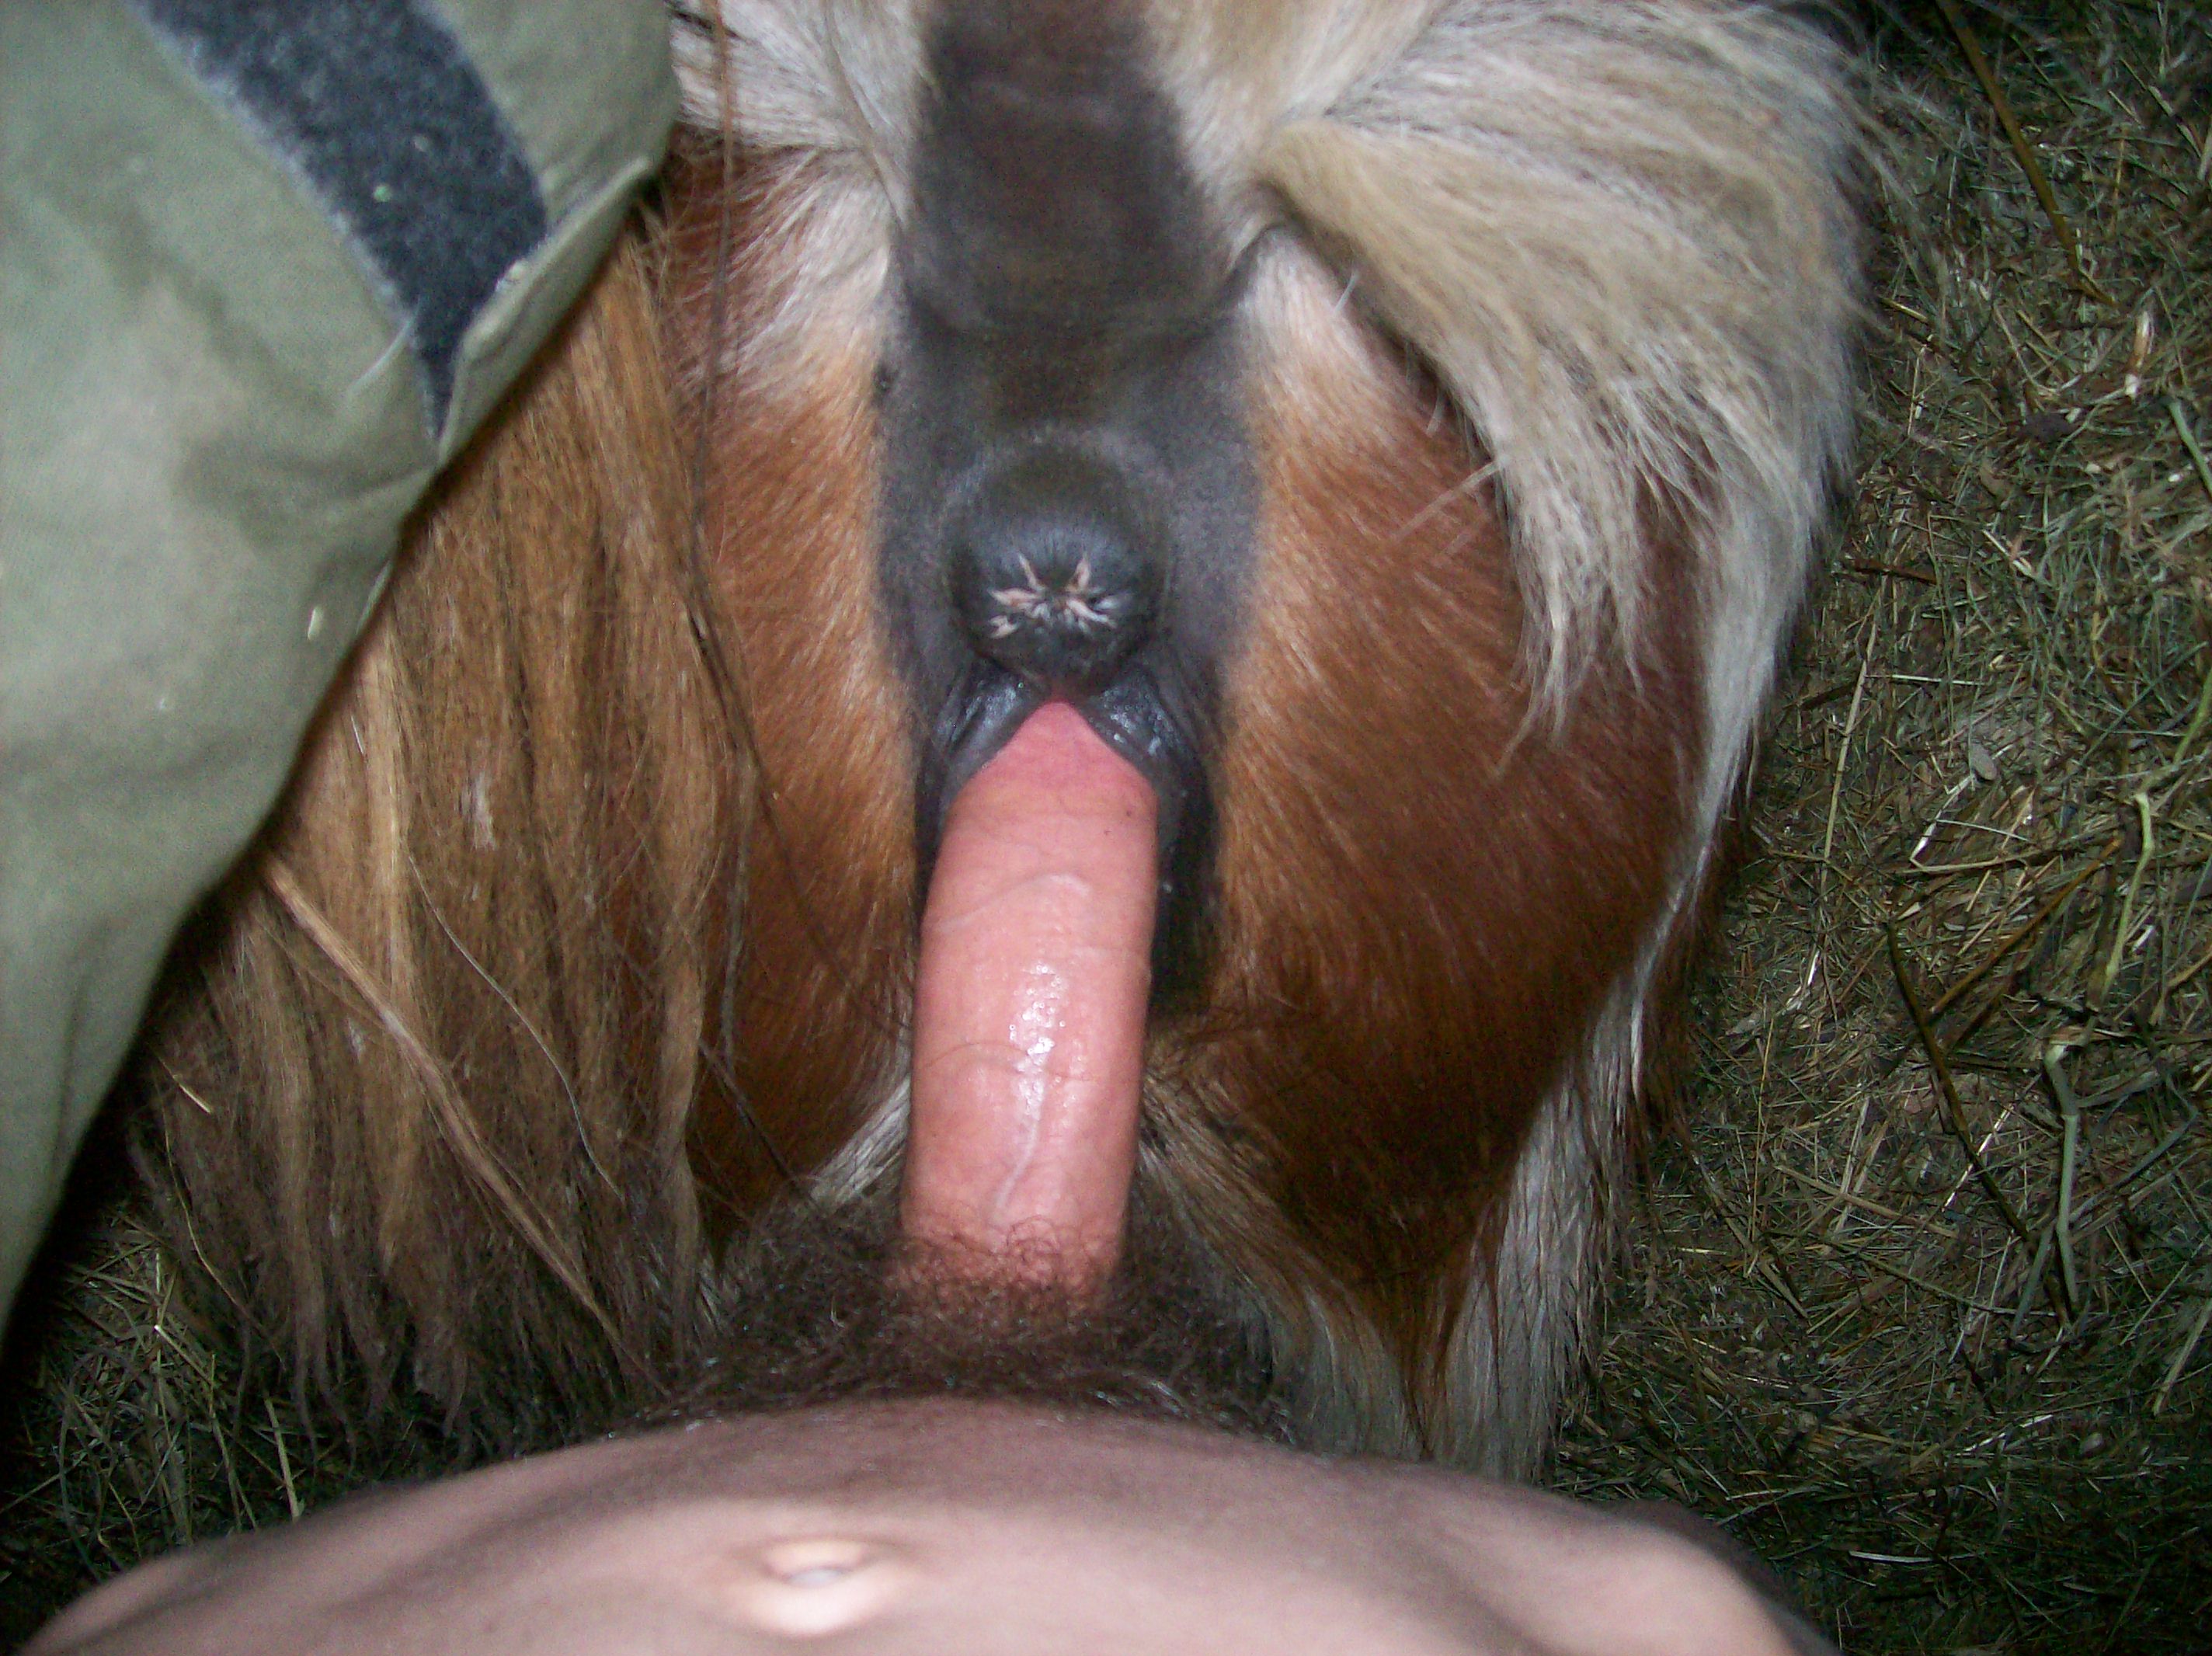 Porn with goat